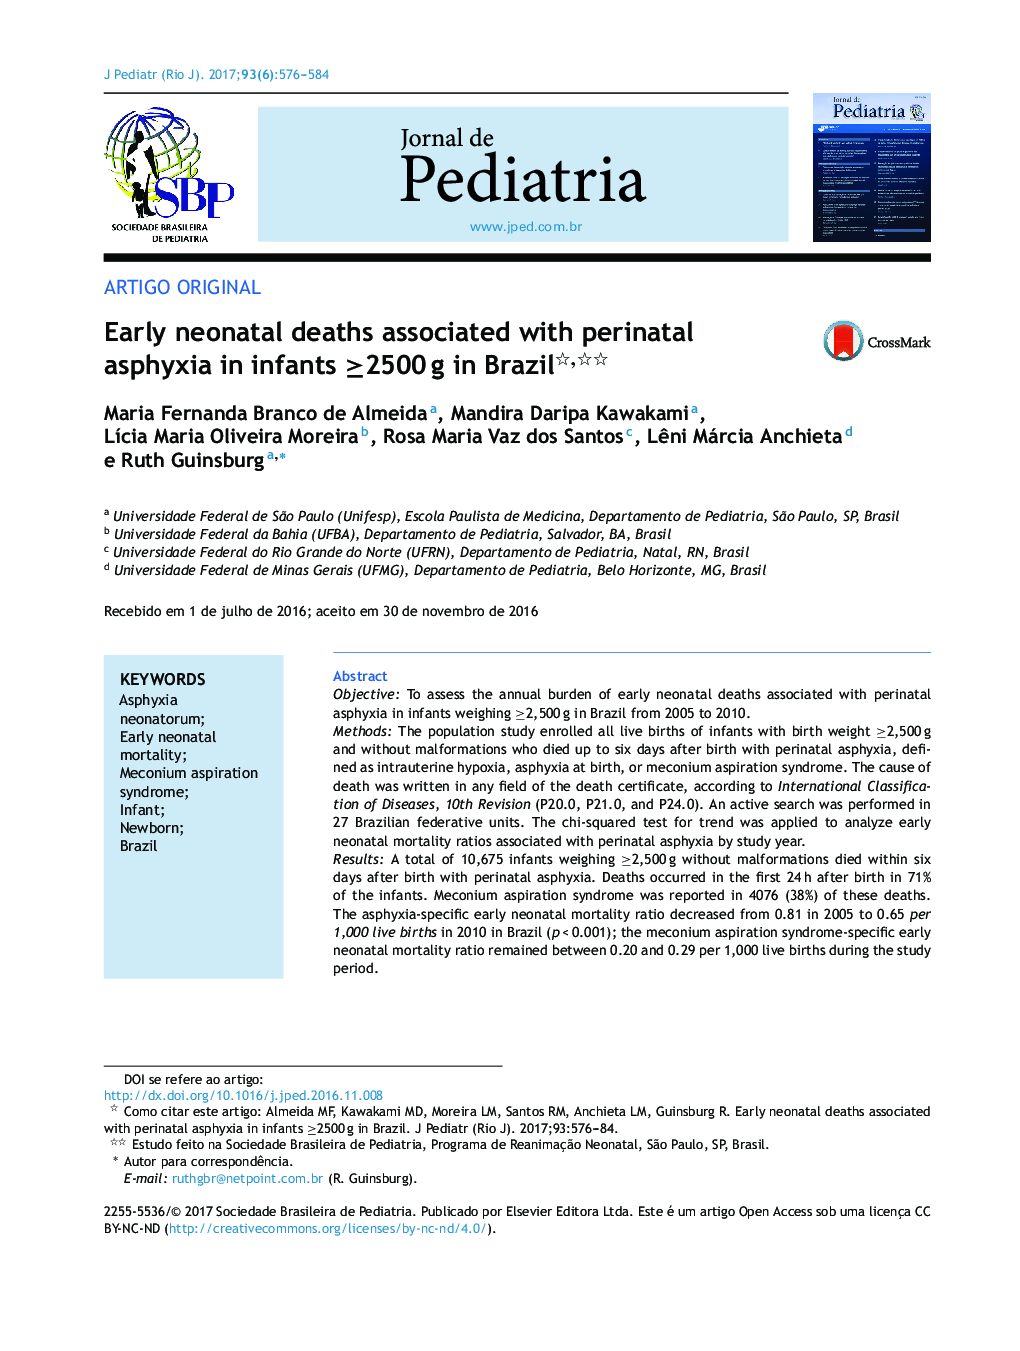 Early neonatal deaths associated with perinatal asphyxia in infants â¥2500Â g in Brazil